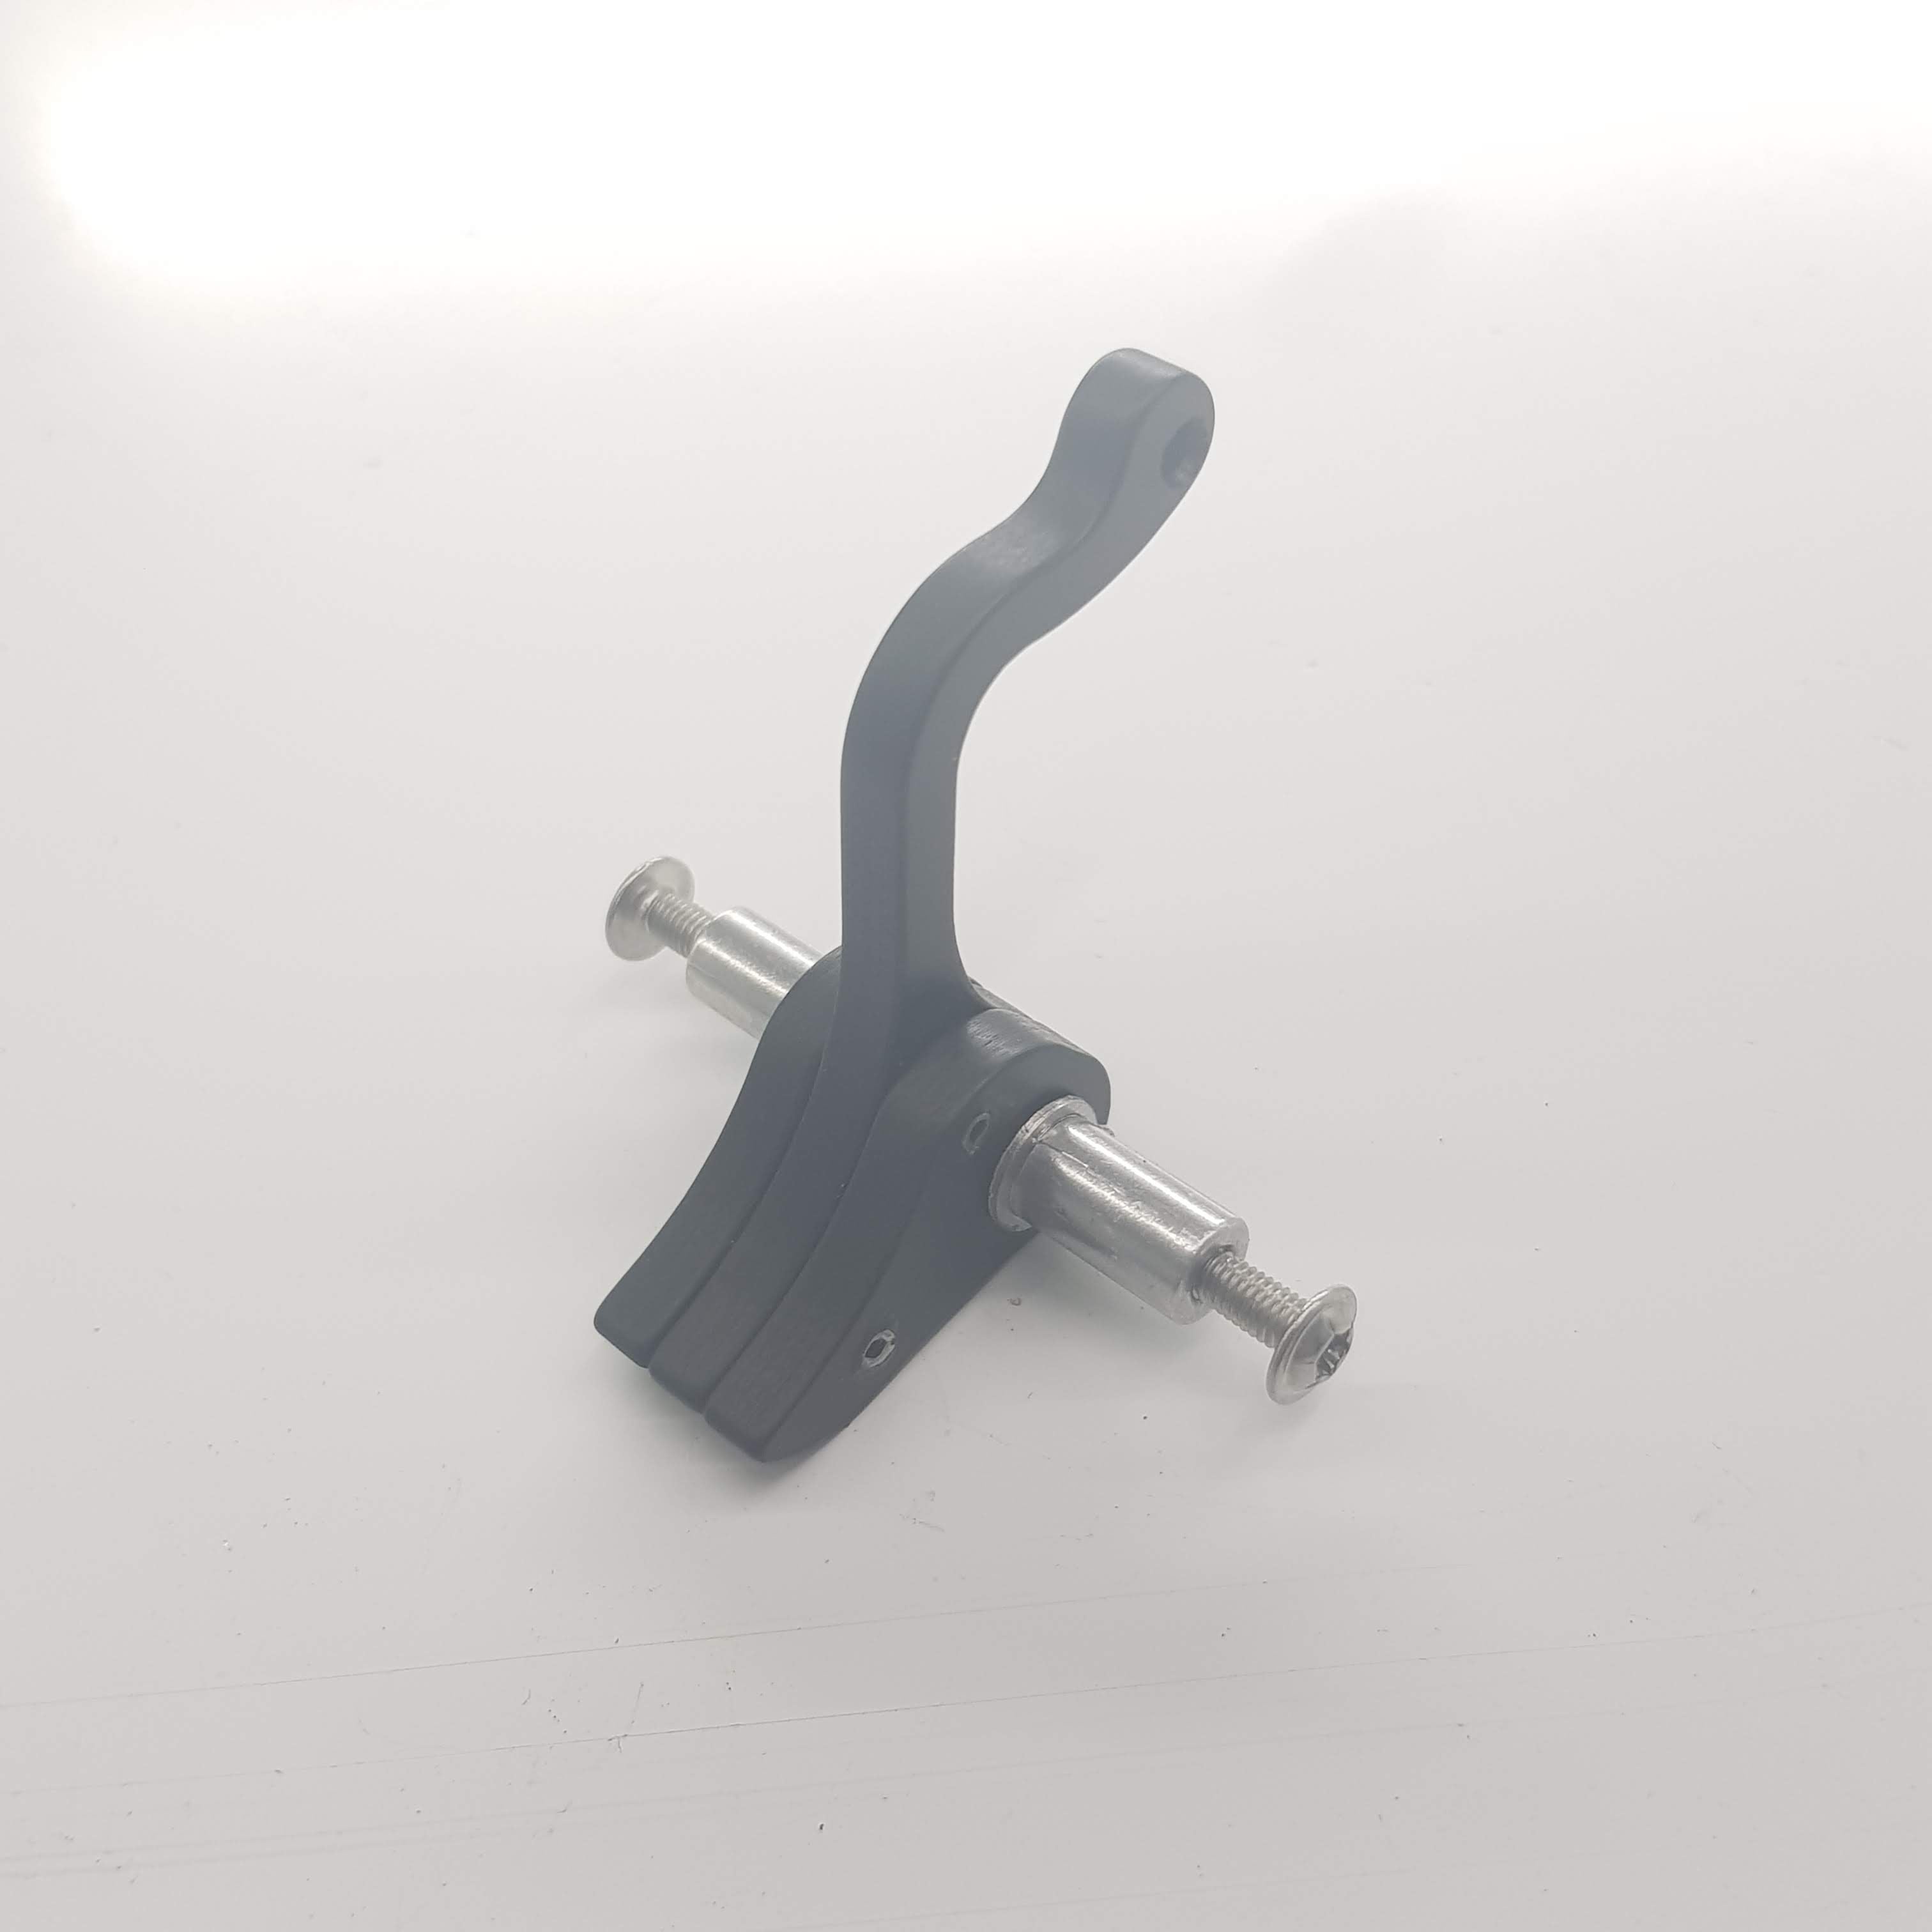 Wheel shoe brake for undercarriage scale 1:4.0 wheel 90 mm